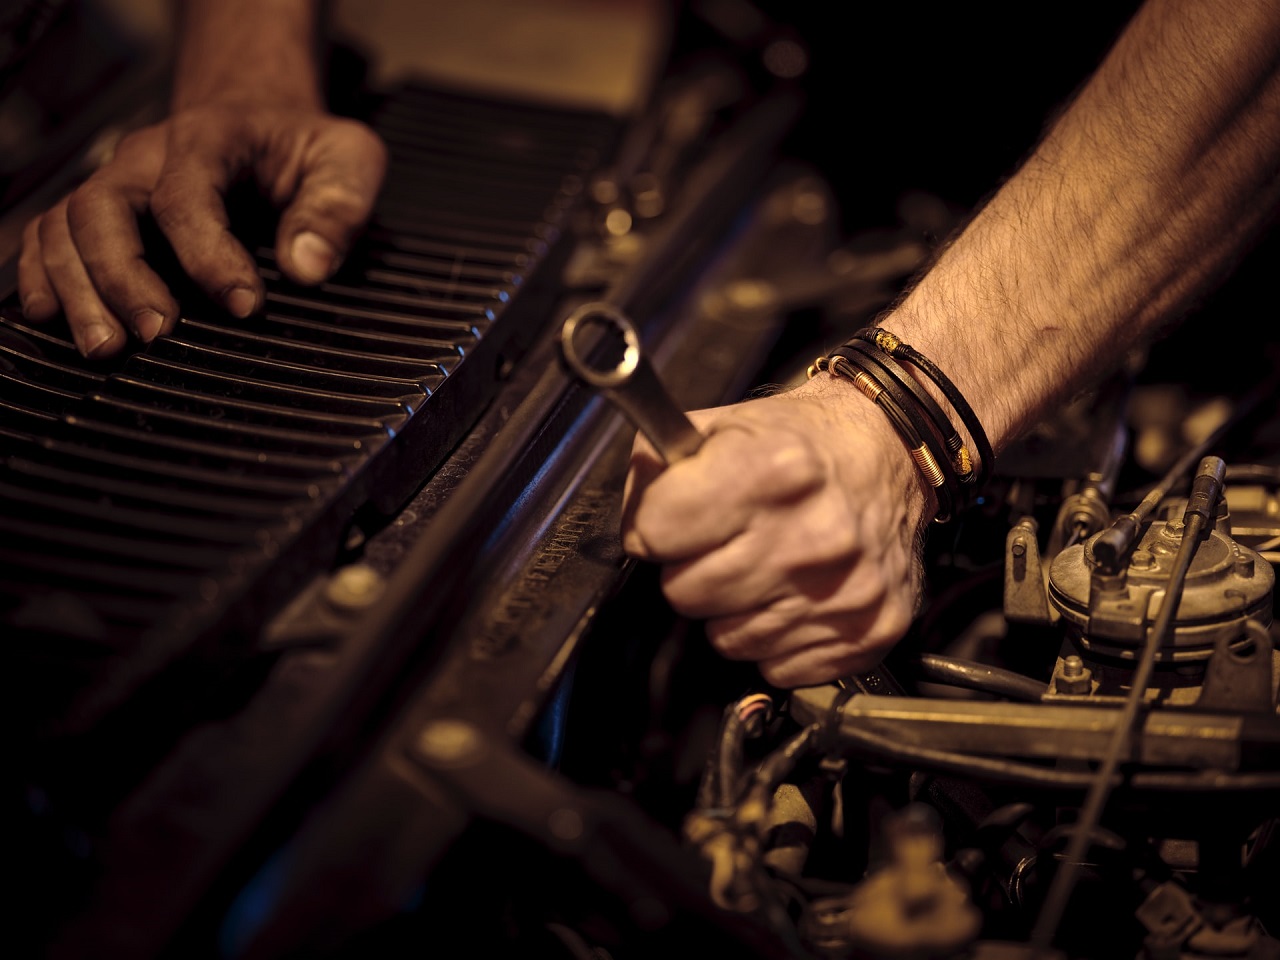 Car repair estimate – everything you need to know about it